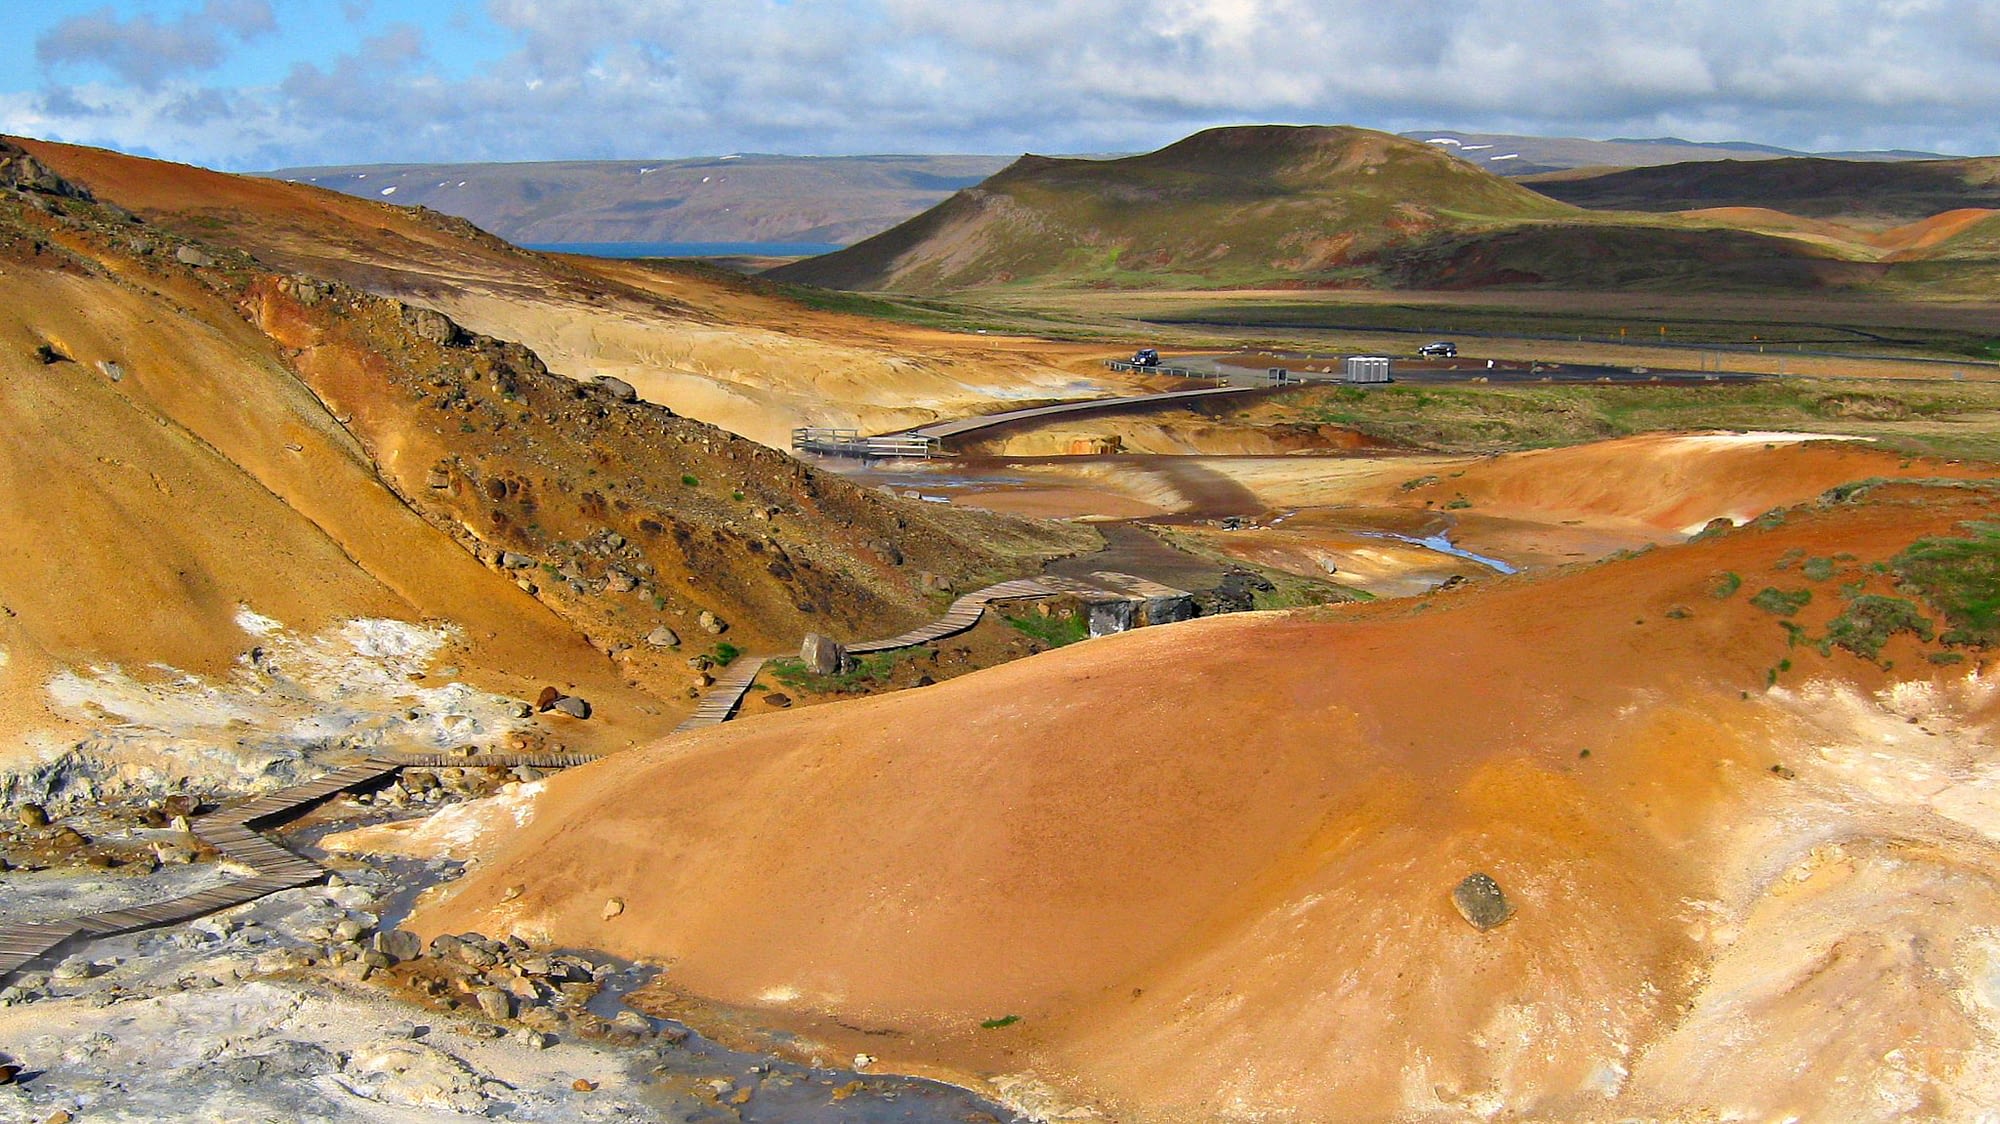 A tour of the Reykjanes peninsula is one of the best ways to connect with nature